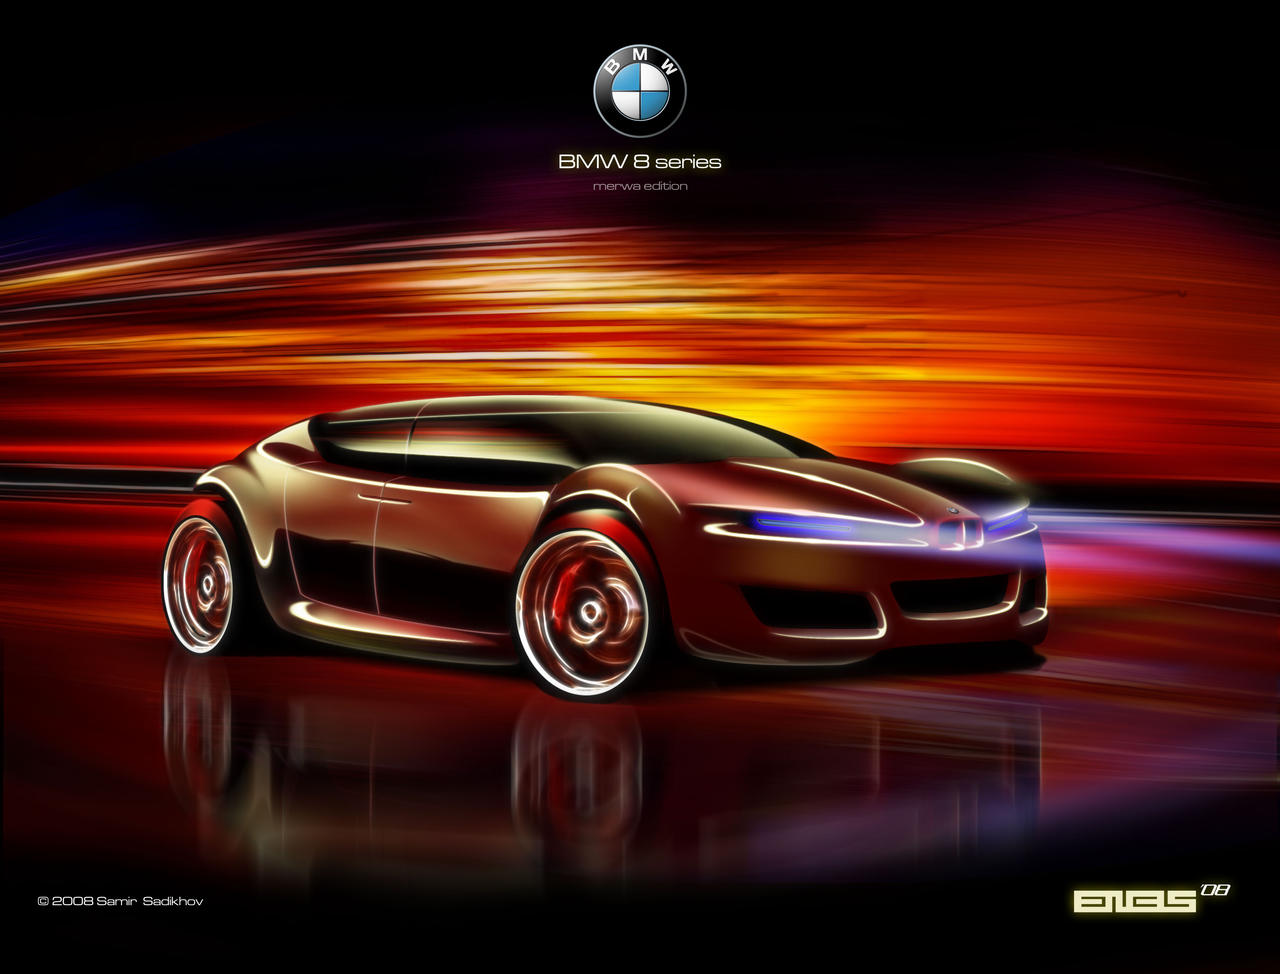  Series on New Design Of The Bmw 8 Series  It Combines The Existing E63 E64 6